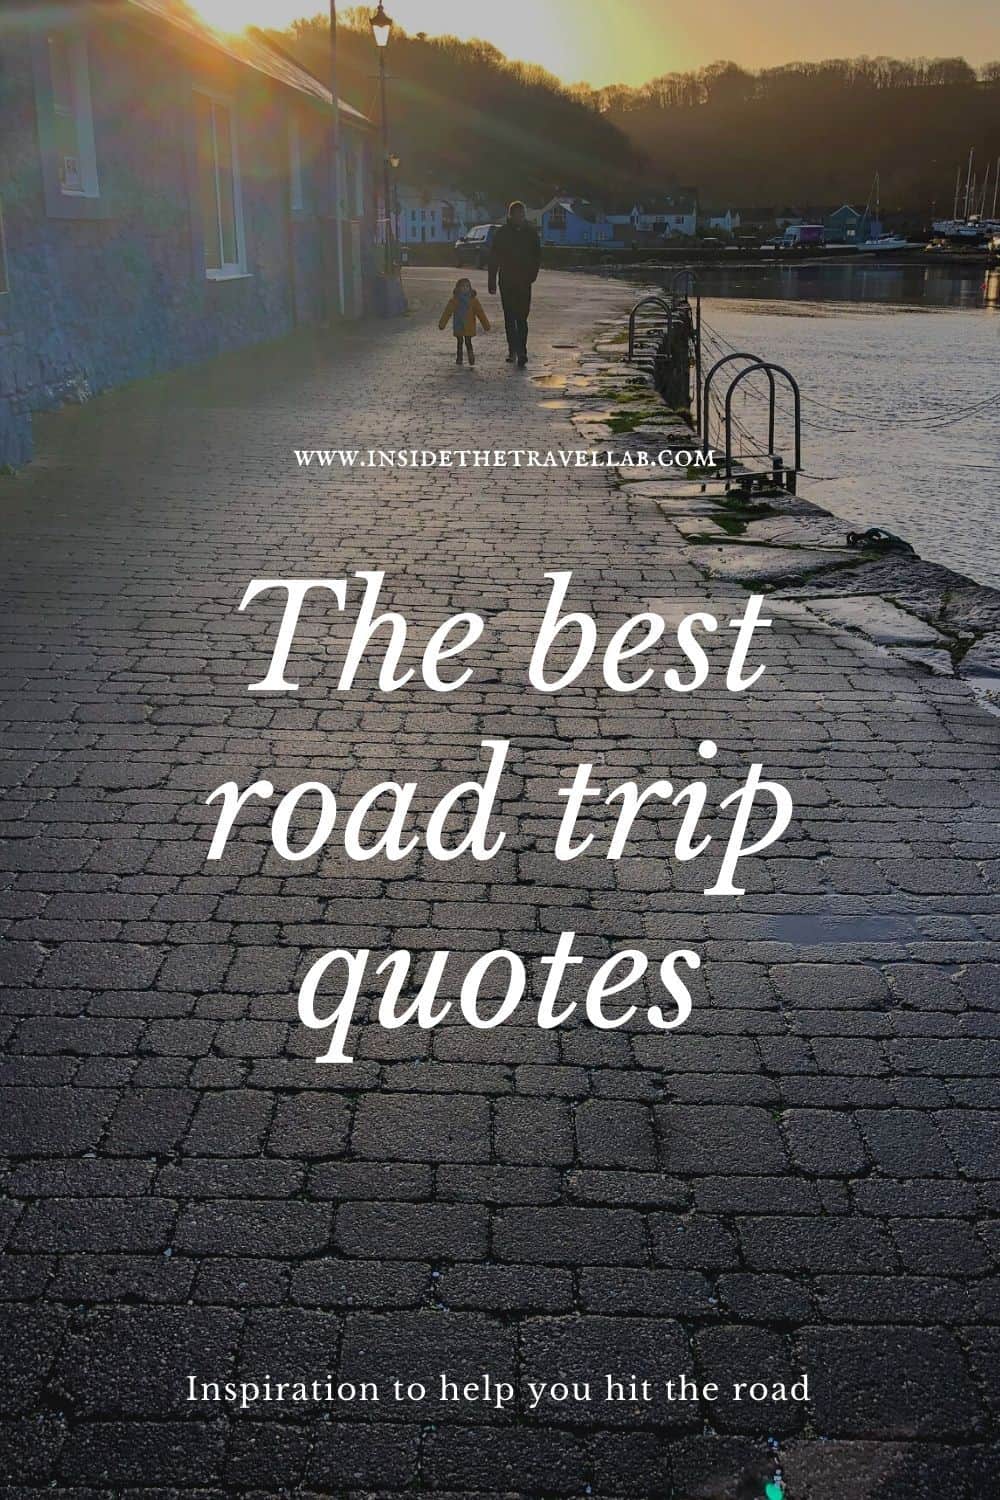 The best road trip quotes pinterest image